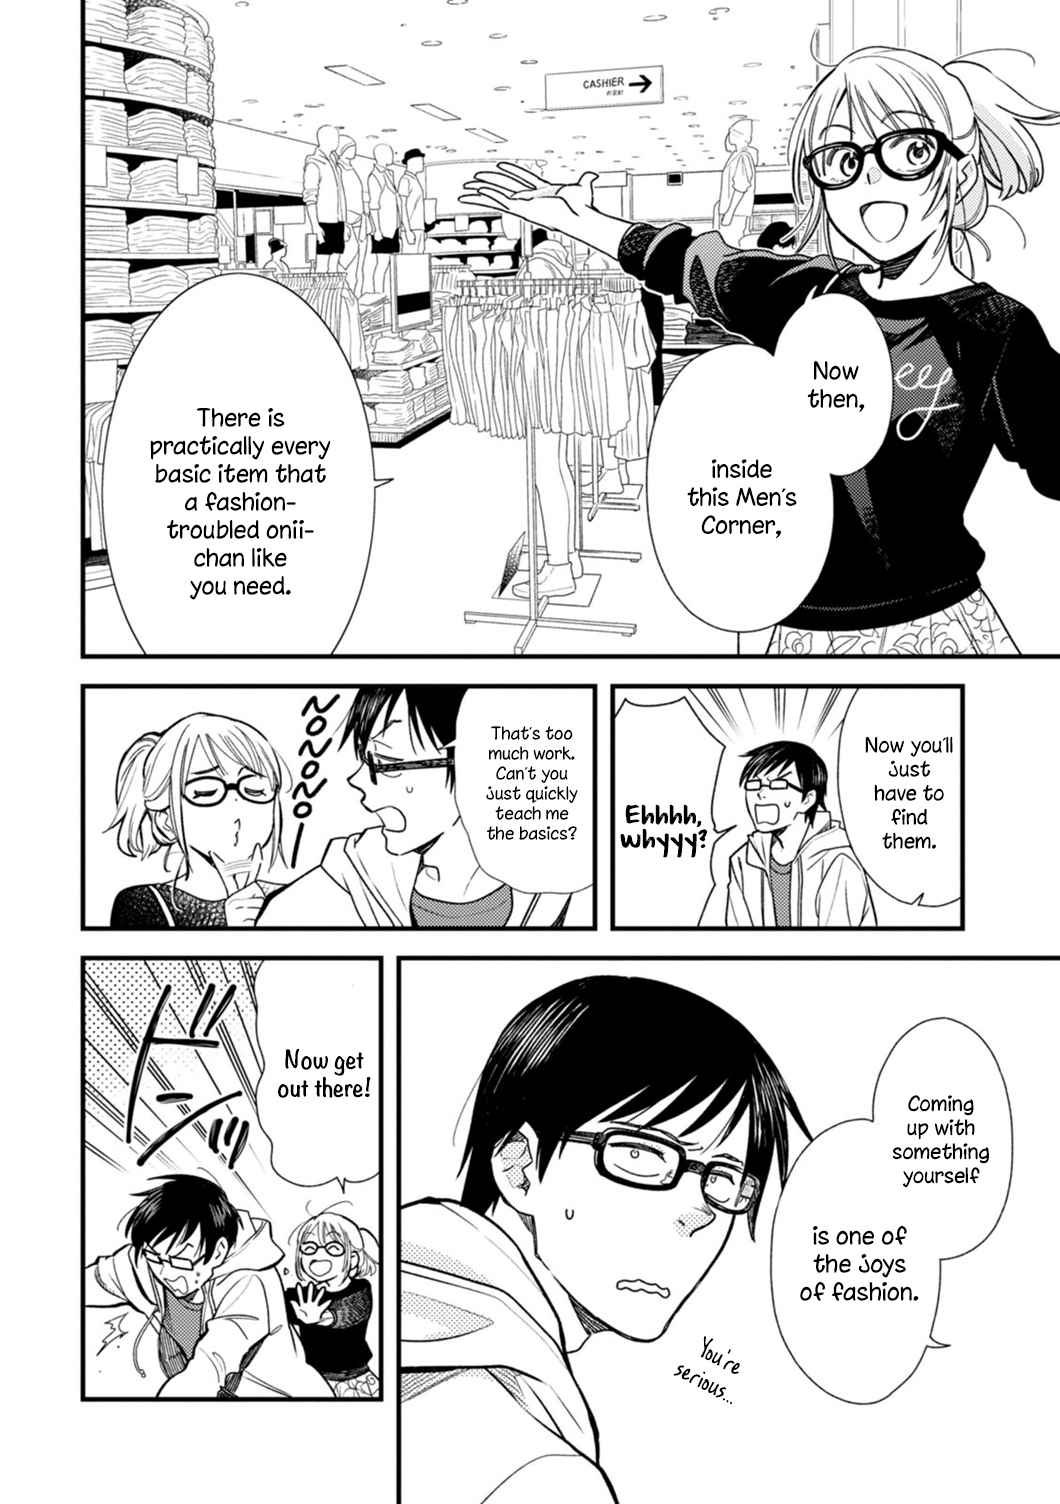 If You're Gonna Dress Up, Do It Like This Vol. 1 Ch. 2